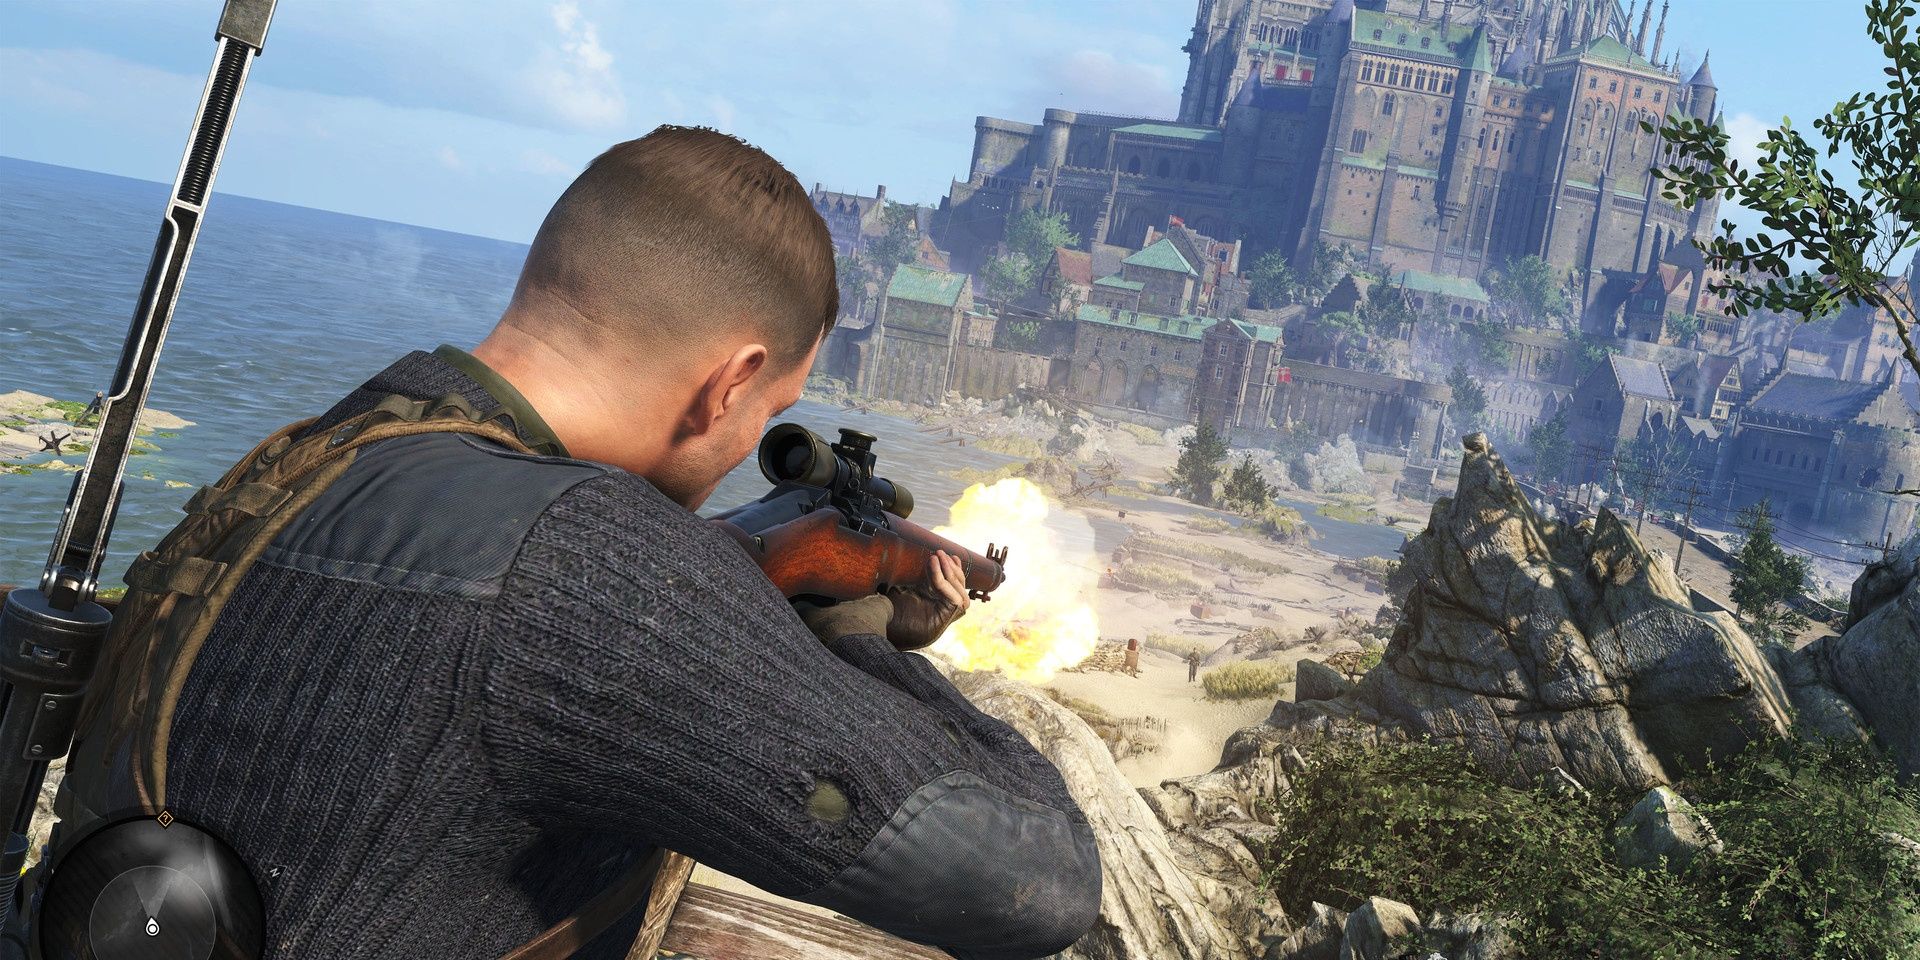 A screenshot showing Karl shooting at an enemy soldier in the distance in Sniper Elite 5